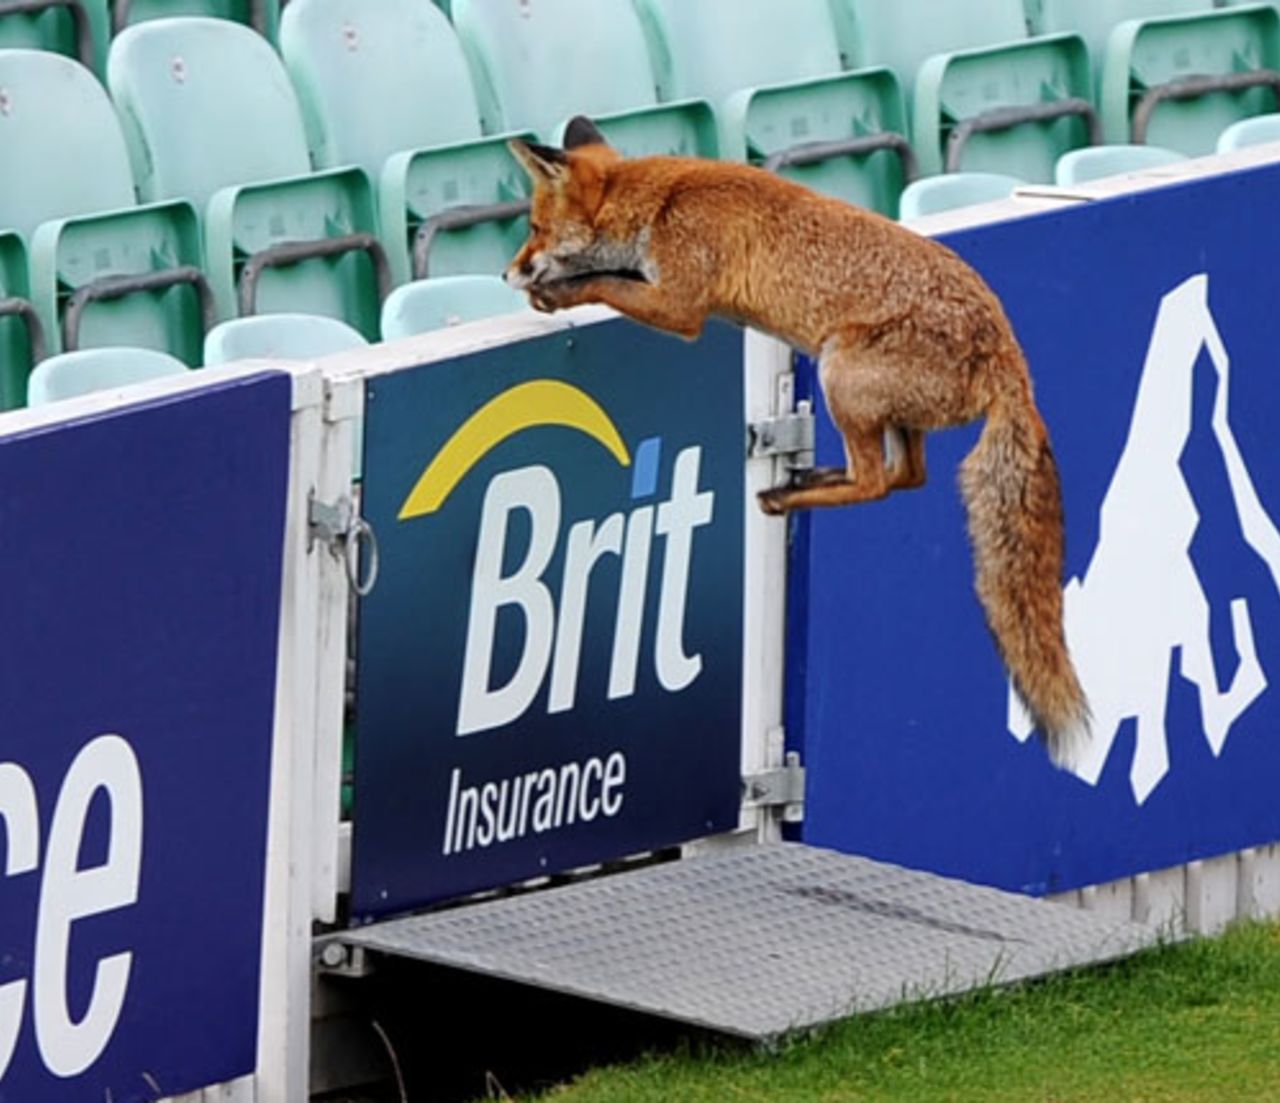 A fox heads for cover after interrupting play at The Oval, Surrey v Warwickshire, Pro40, The Oval, September 16, 2009